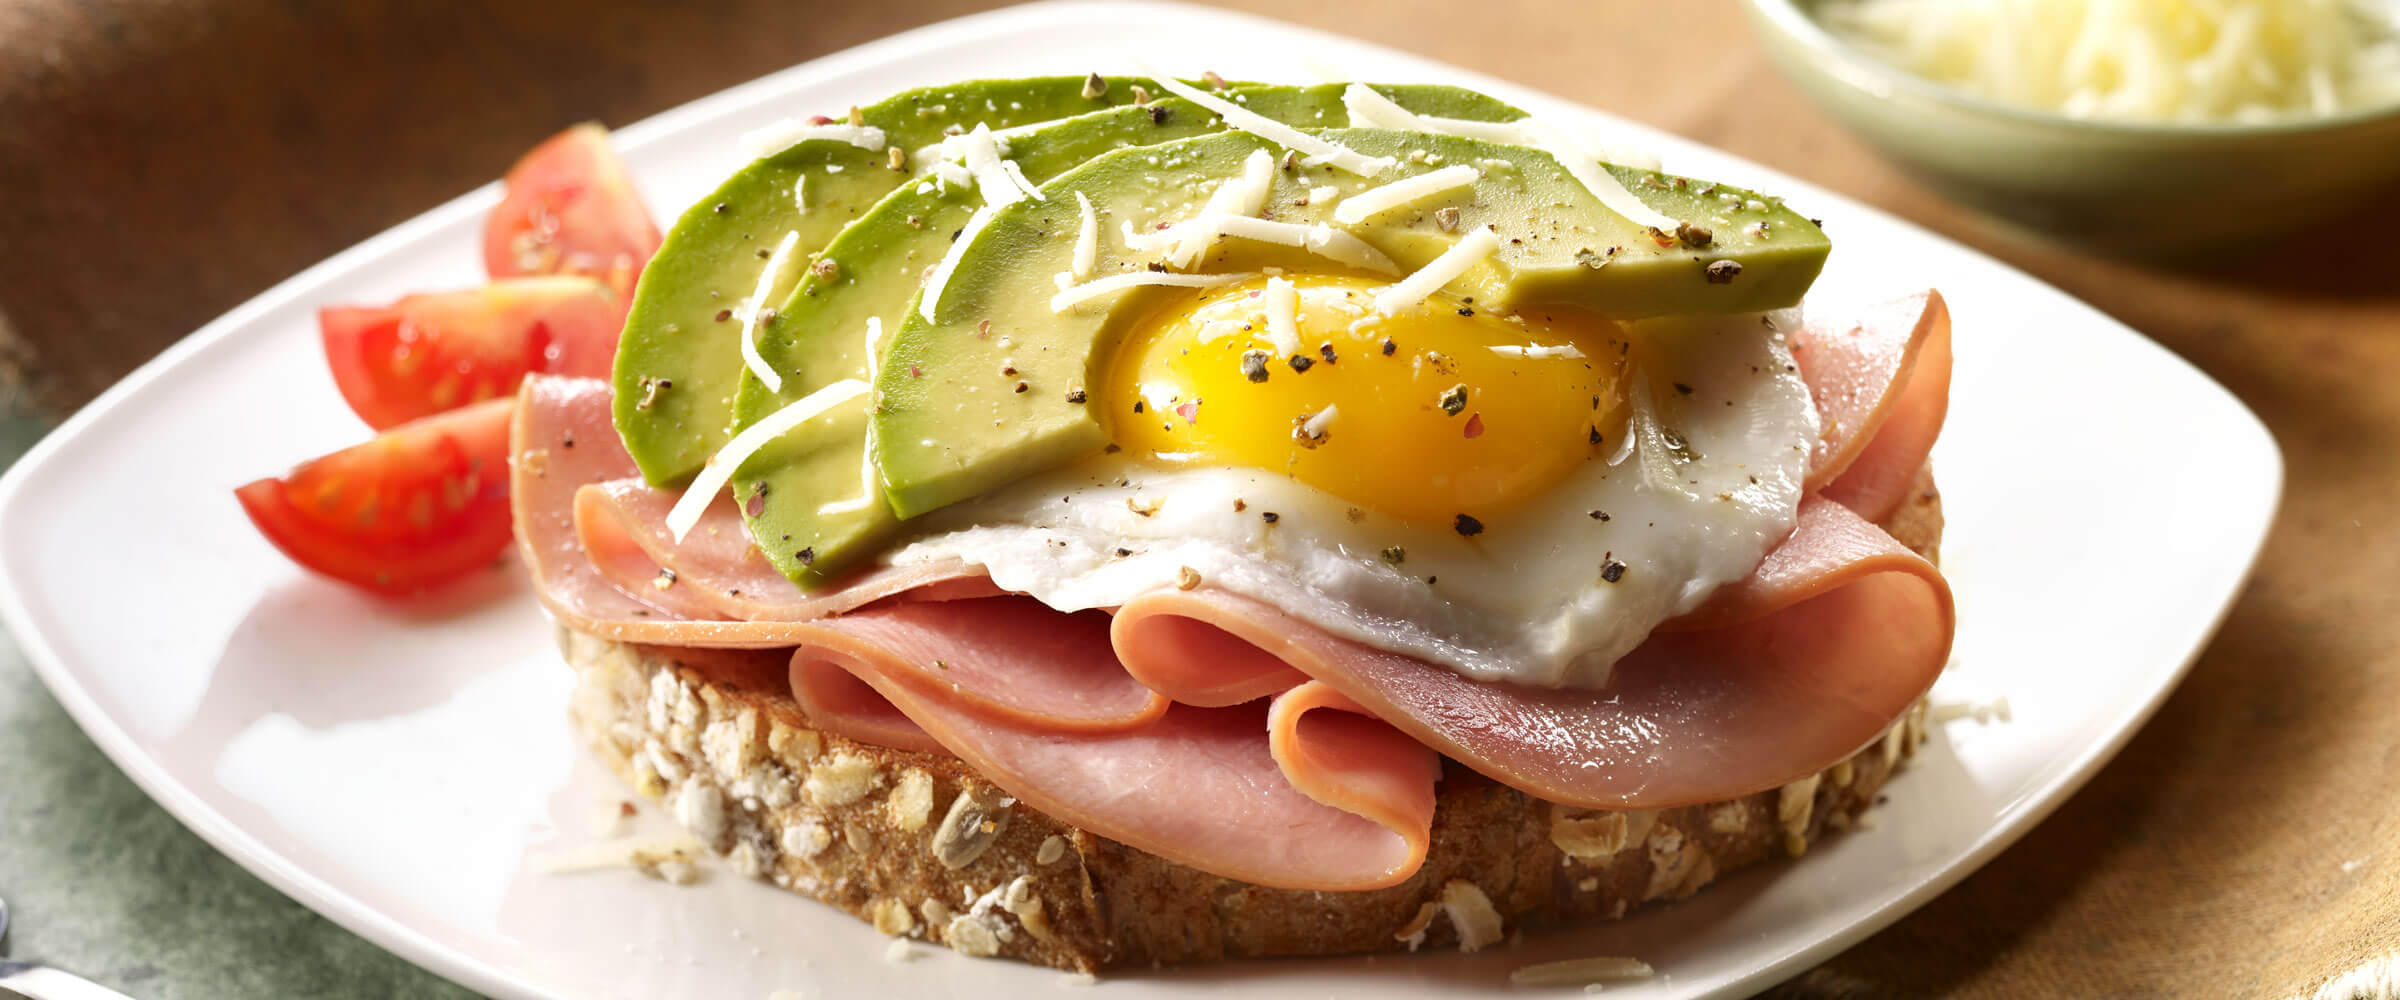 Ham, Egg and Avocado Toasts on white plate